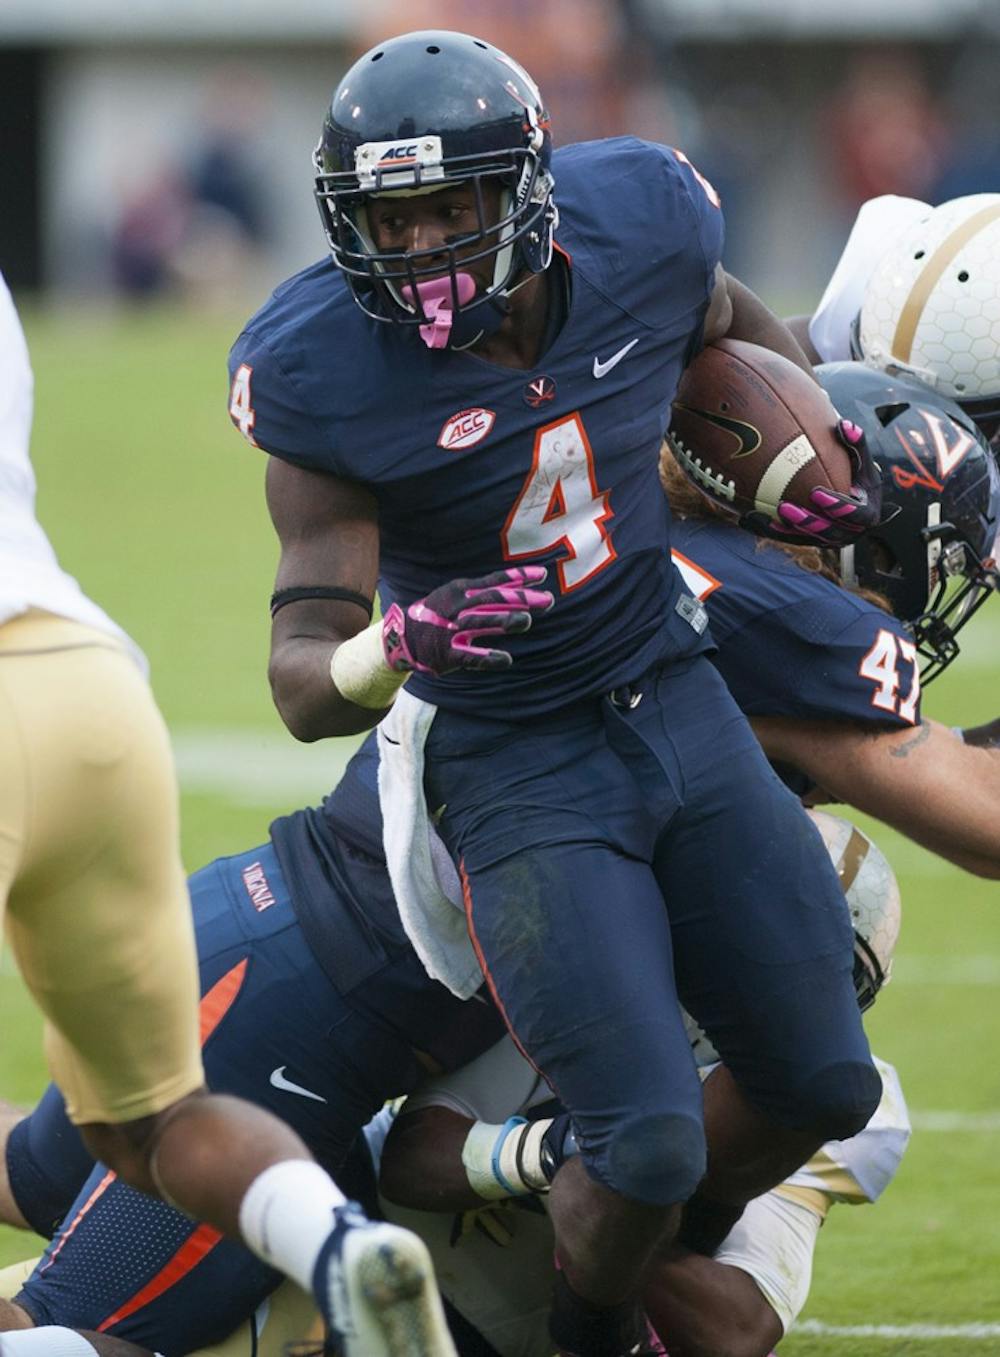 <p>Junior running back Taquan Mizzell's 63 receptions this season leave him in select company: with two games to play, he is tied for fourth-most receptions by a tailback in a single season.&nbsp; </p>